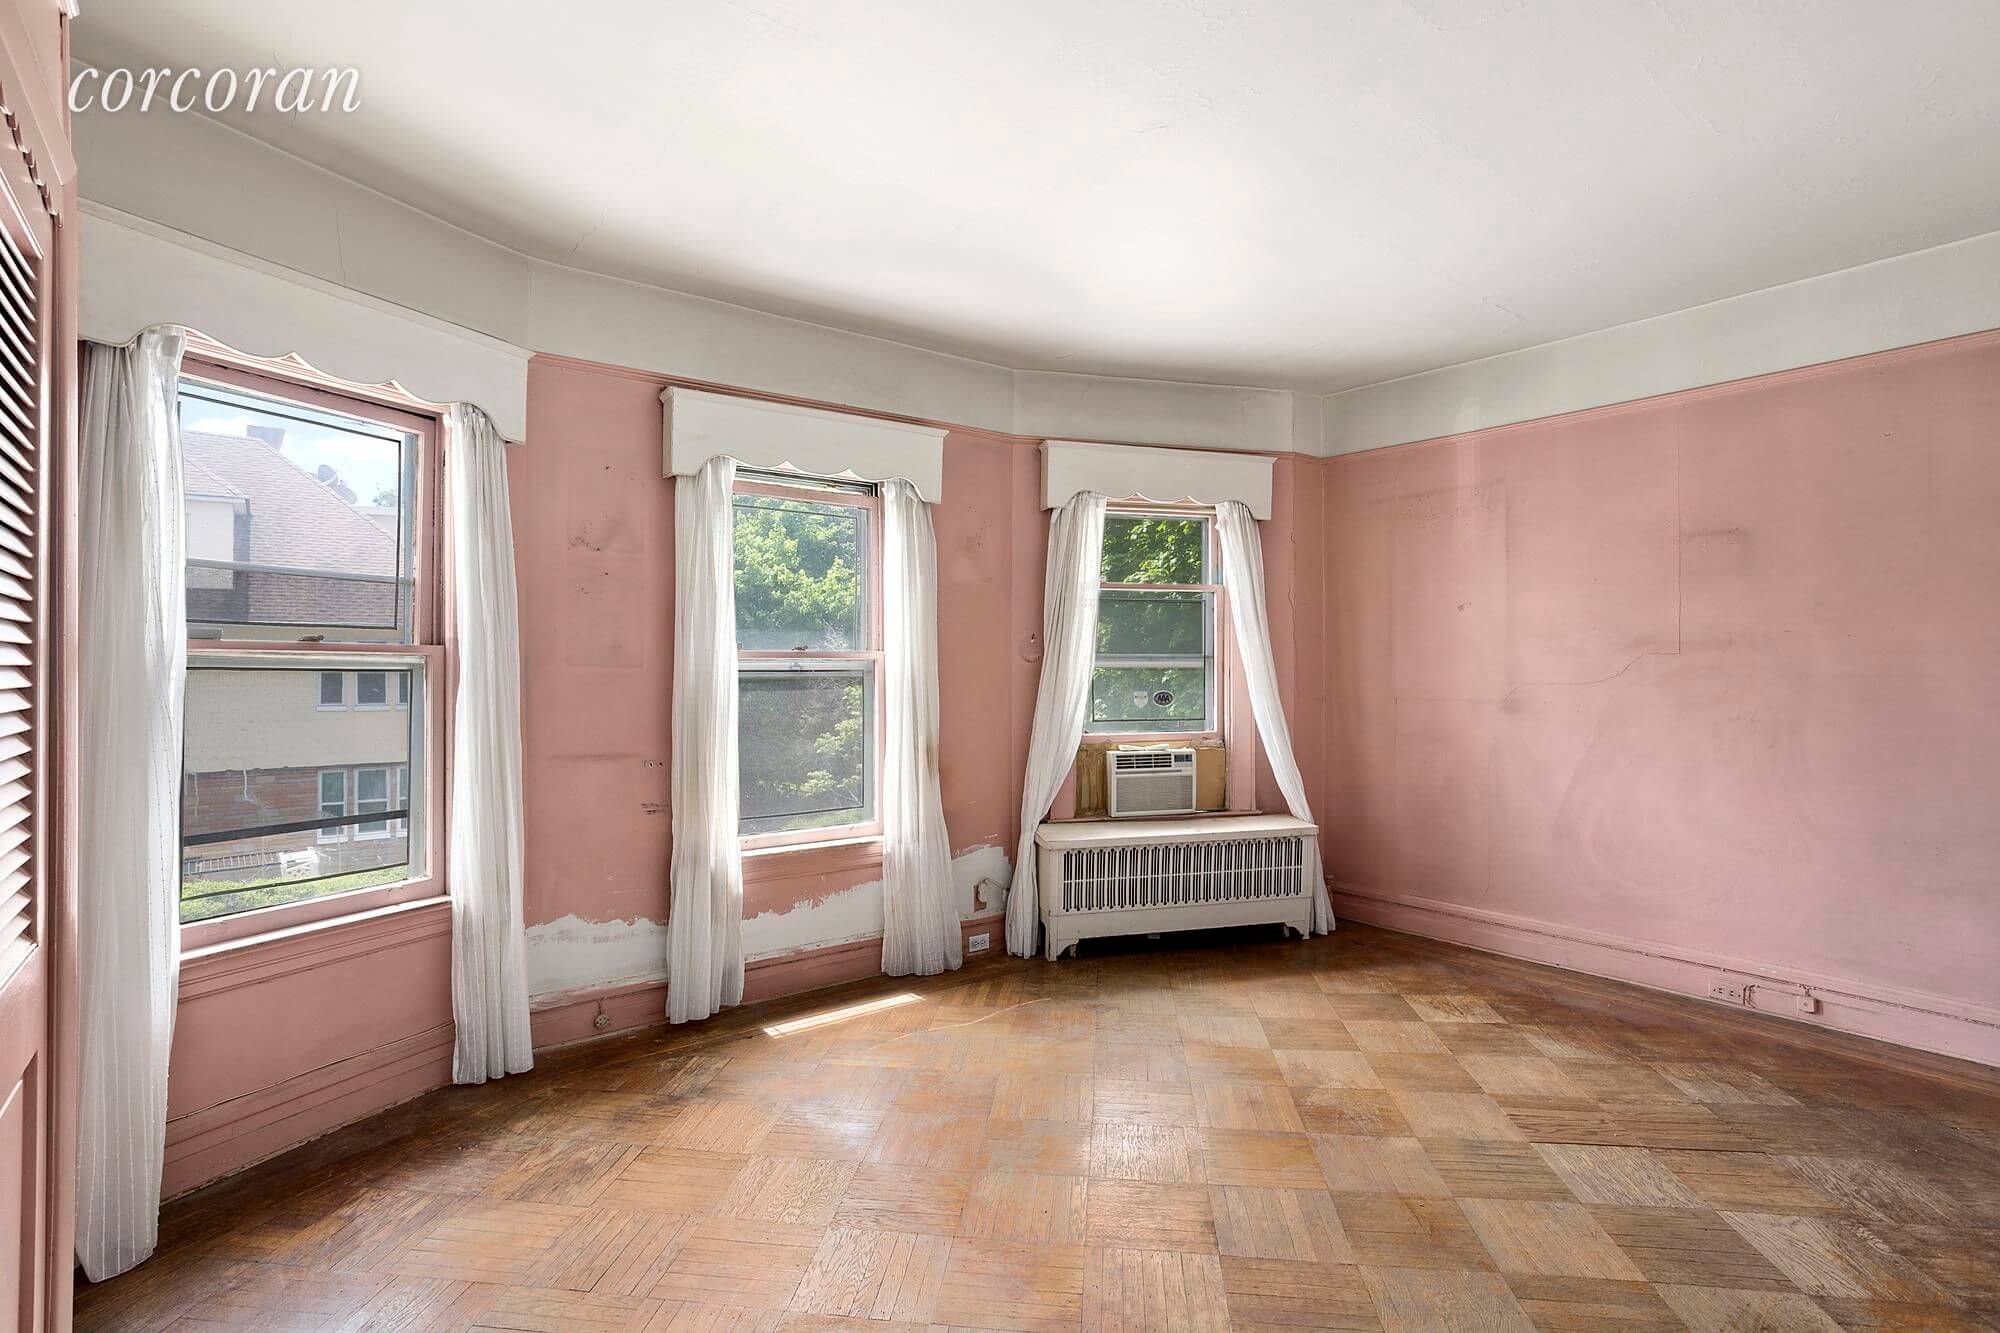 Brooklyn Homes for Sale in Prospect Park South at 126 Stratford Road